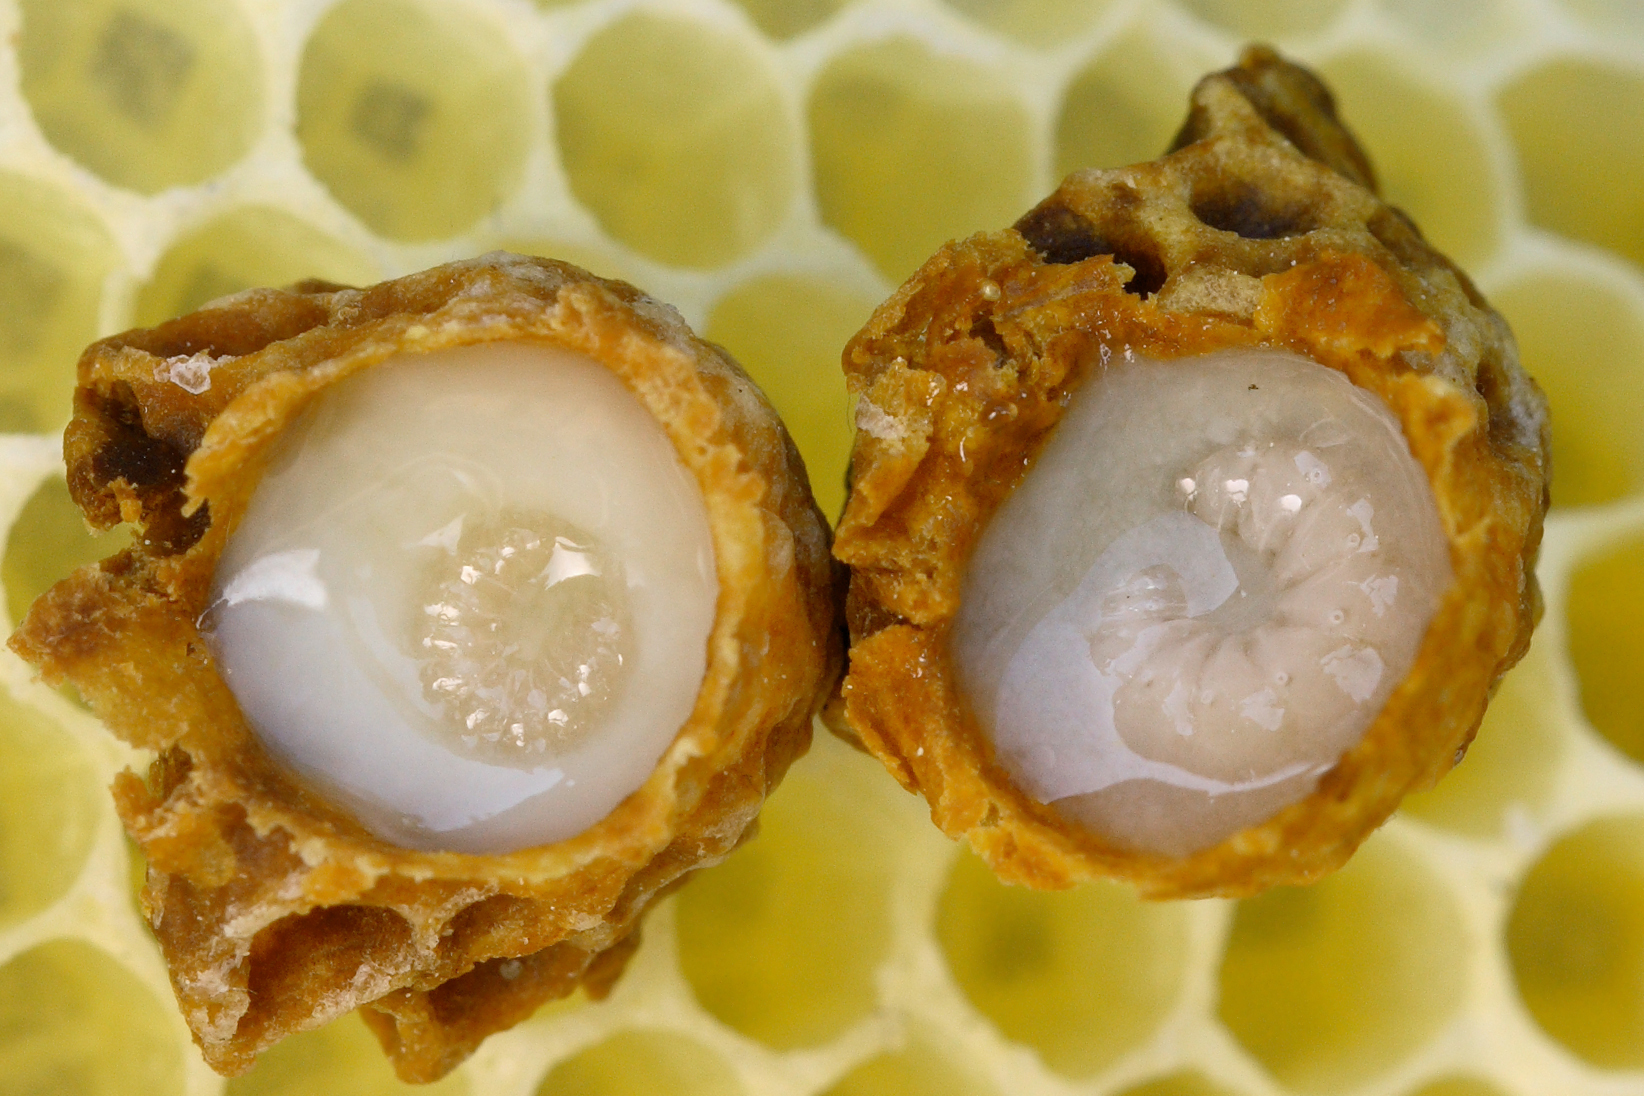 Developing queen larvae surrounded by royal jelly.

WAUGSBERG/WIKIMEDIA COMMONS, <a href=